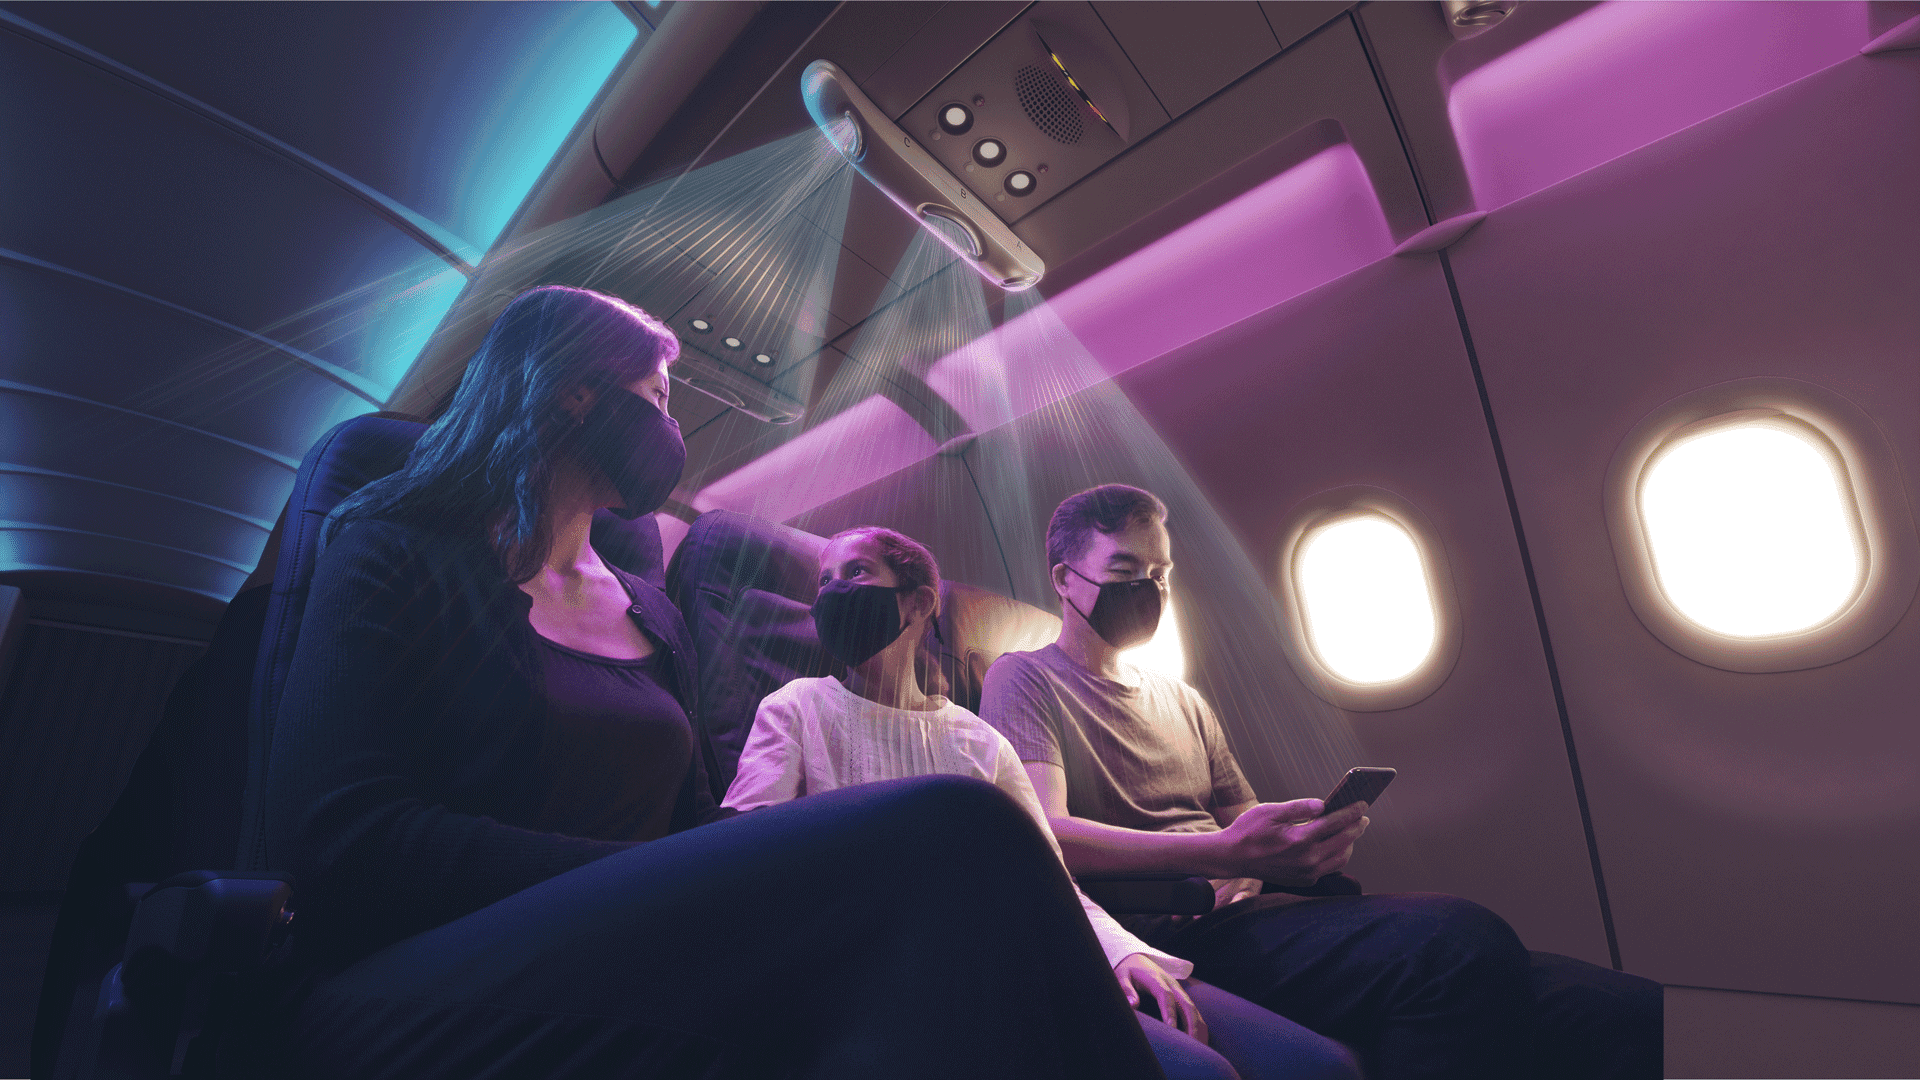 Three passengers seated on airplane under the AirShield cabin-air safety device